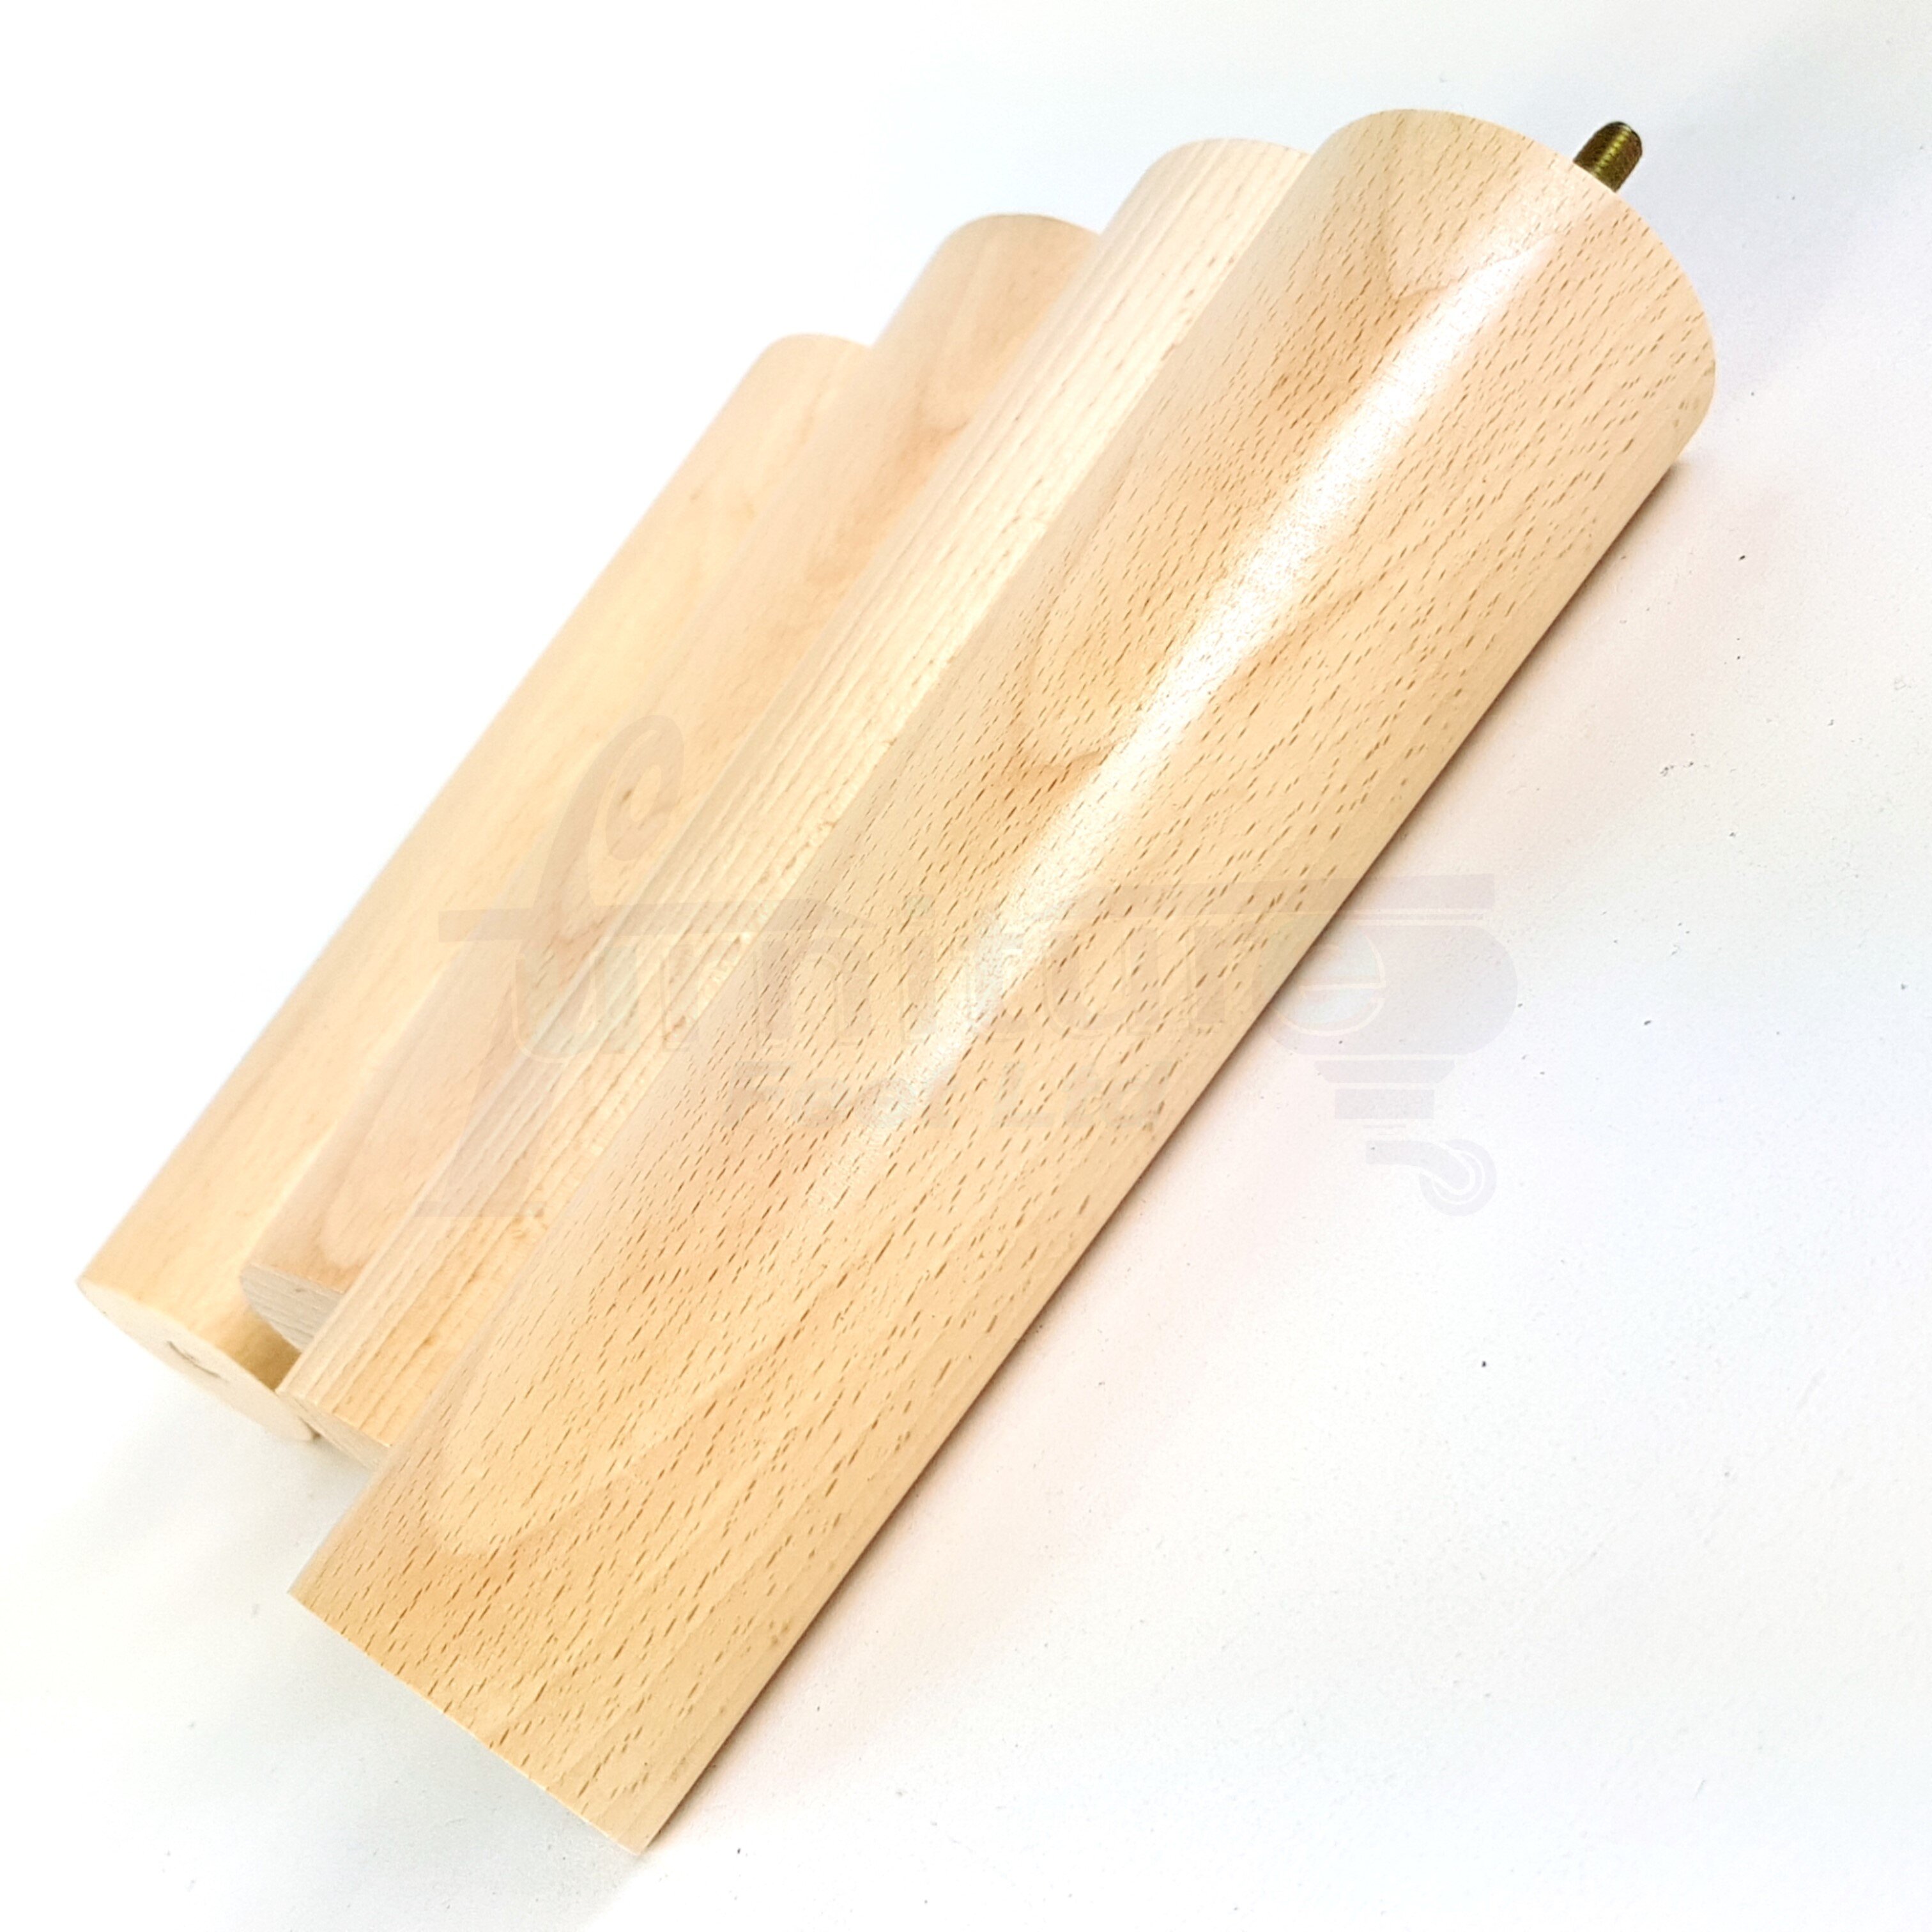 Turned Wood Legs Natural 230Mm High Set Of 4 Replacement Furniture Bun Feet Settee Chairs Sofas Footstools M10 Pkc148